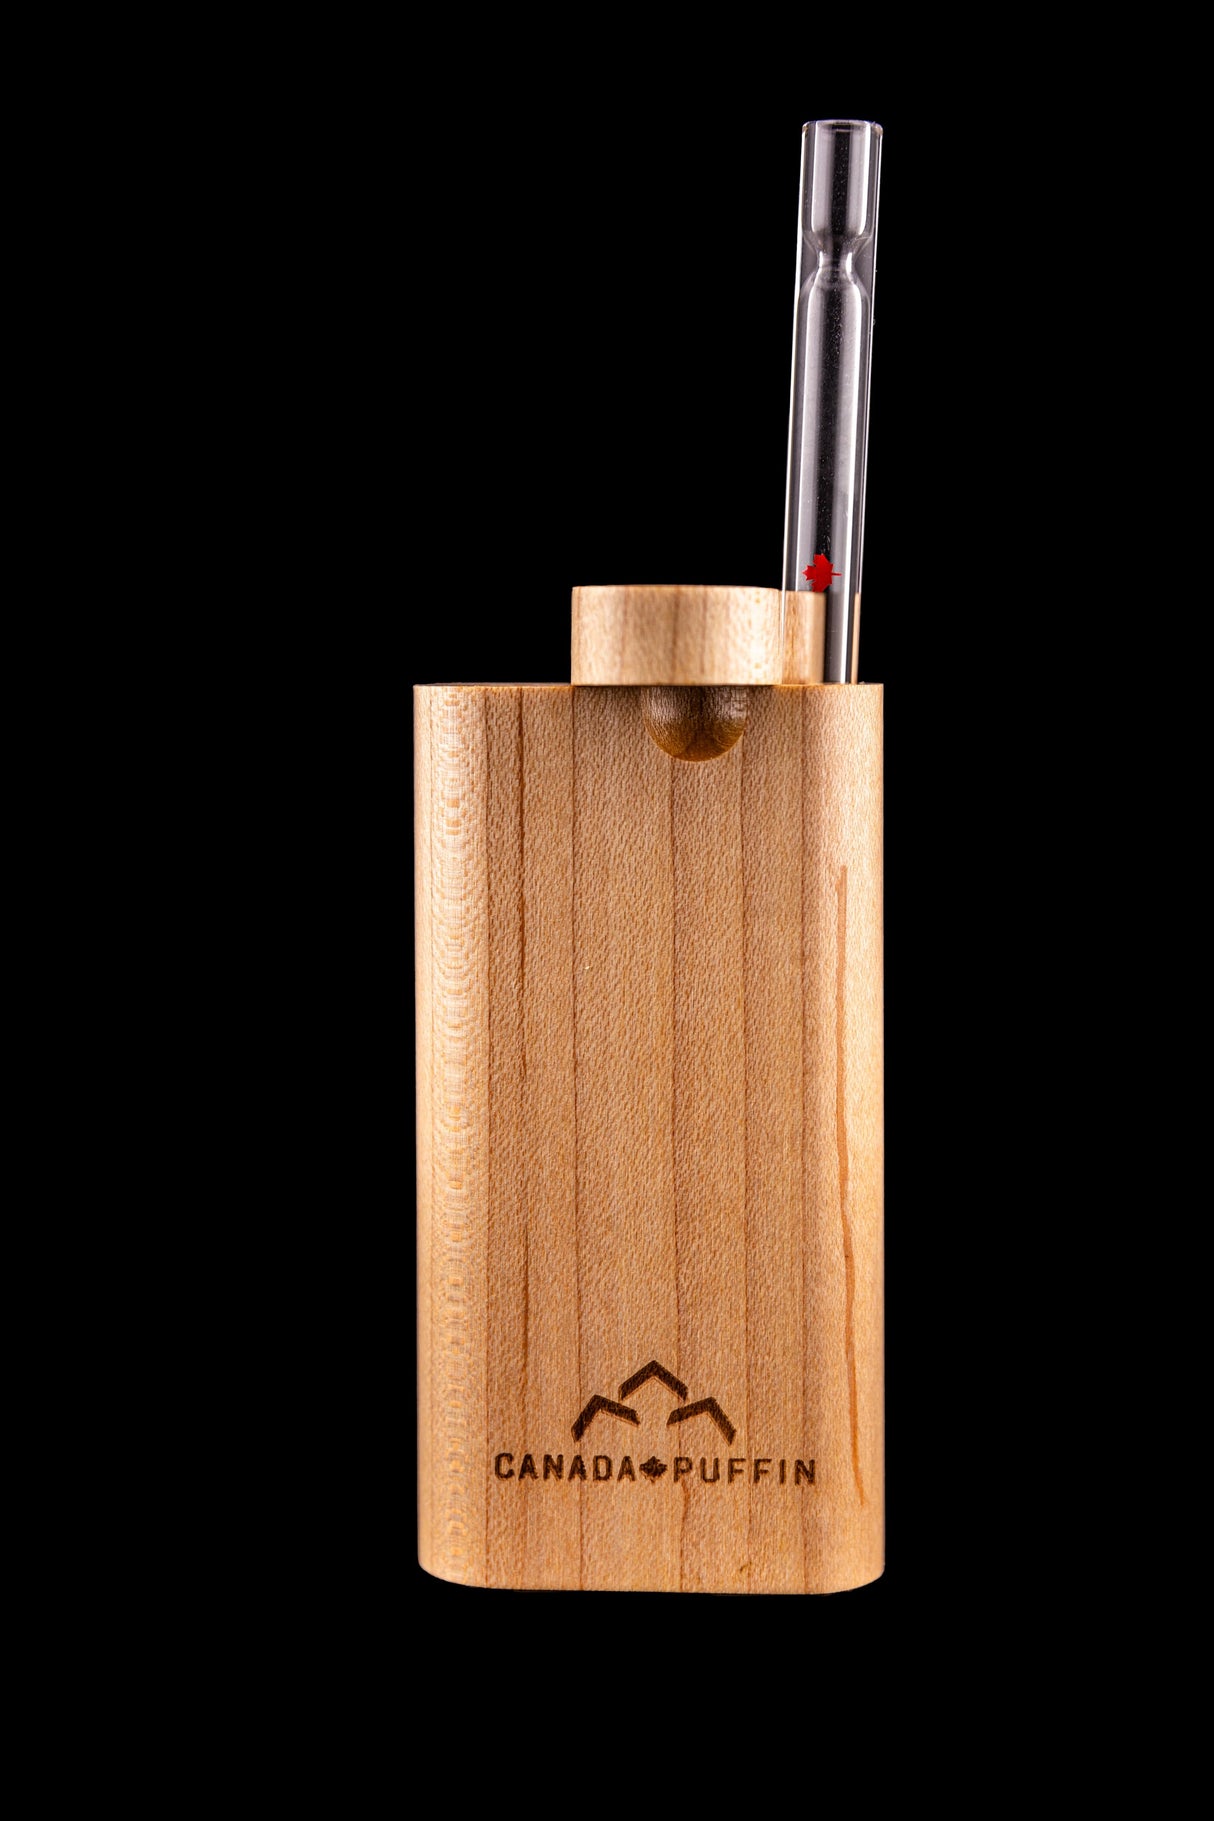 Canada Puffin Banff Dugout and One Hitter with sleek wooden design, front view on black background